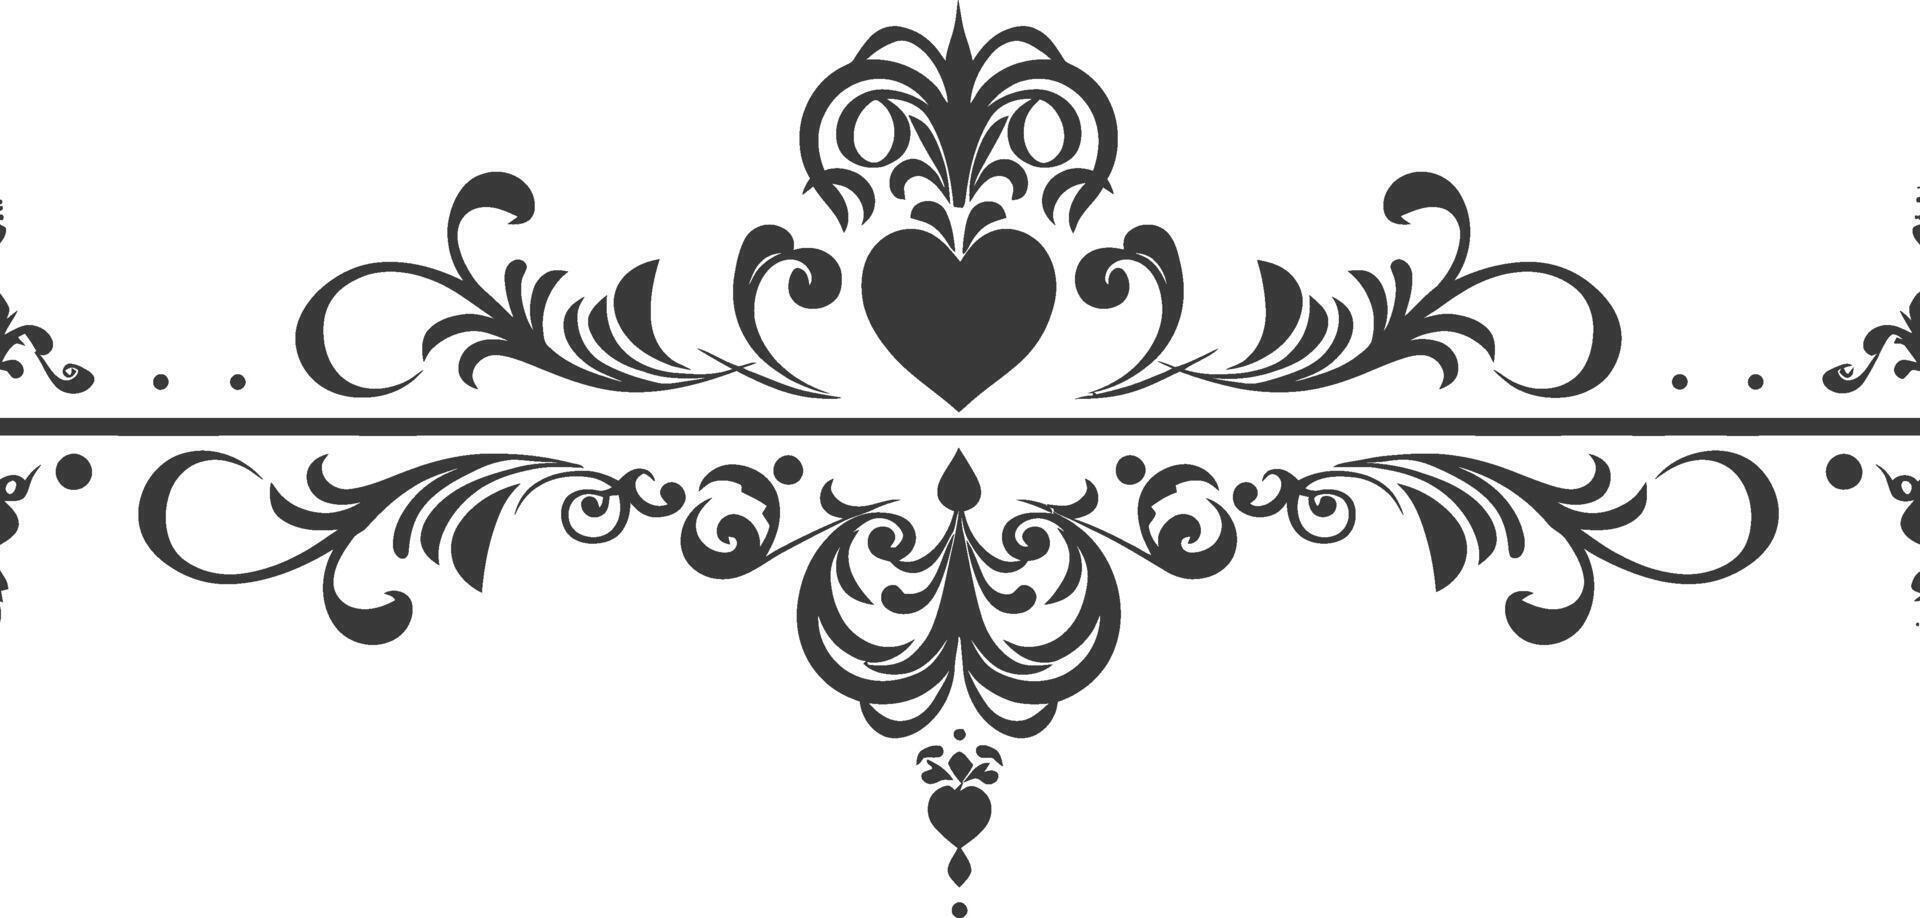 Silhouette horizontal line divider with Hearth shape ornament black color only vector